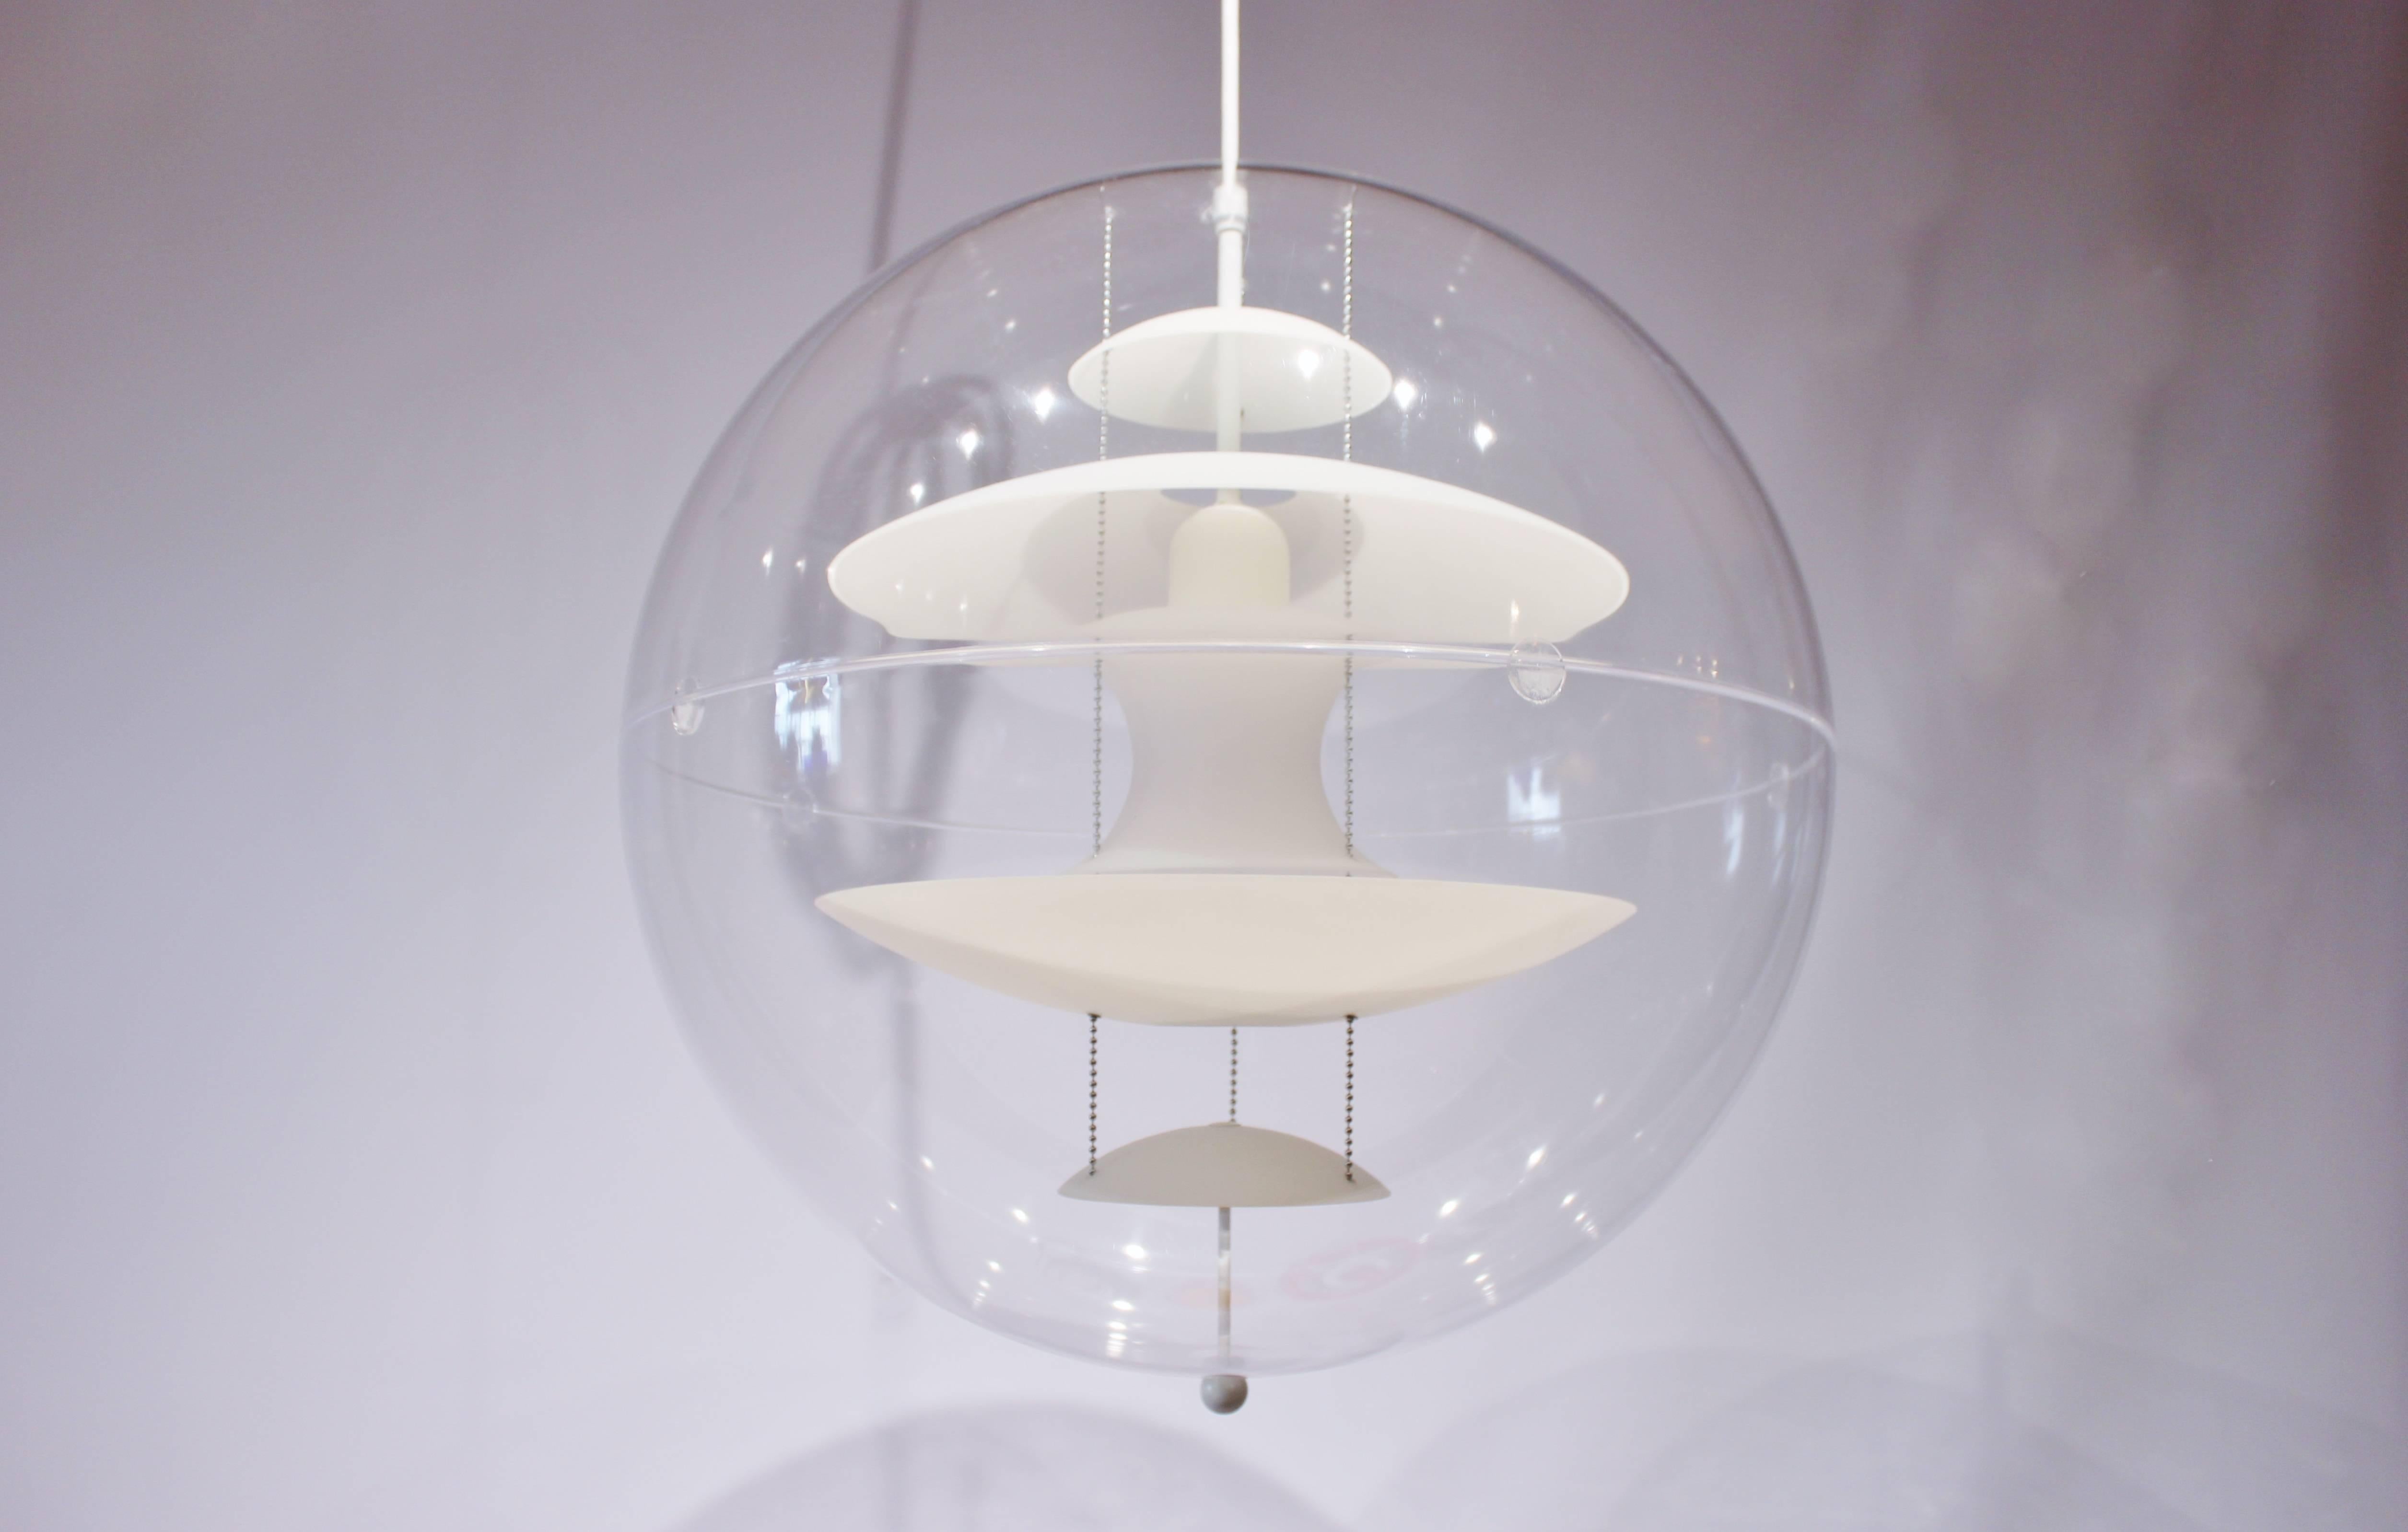 The Globe pendant lamp, crafted by renowned designer Verner Panton in 1969, is a stunning piece that epitomizes the essence of modernist lighting design. Featuring a transparent acrylic globe, this fixture is adorned with five hanging reflectors